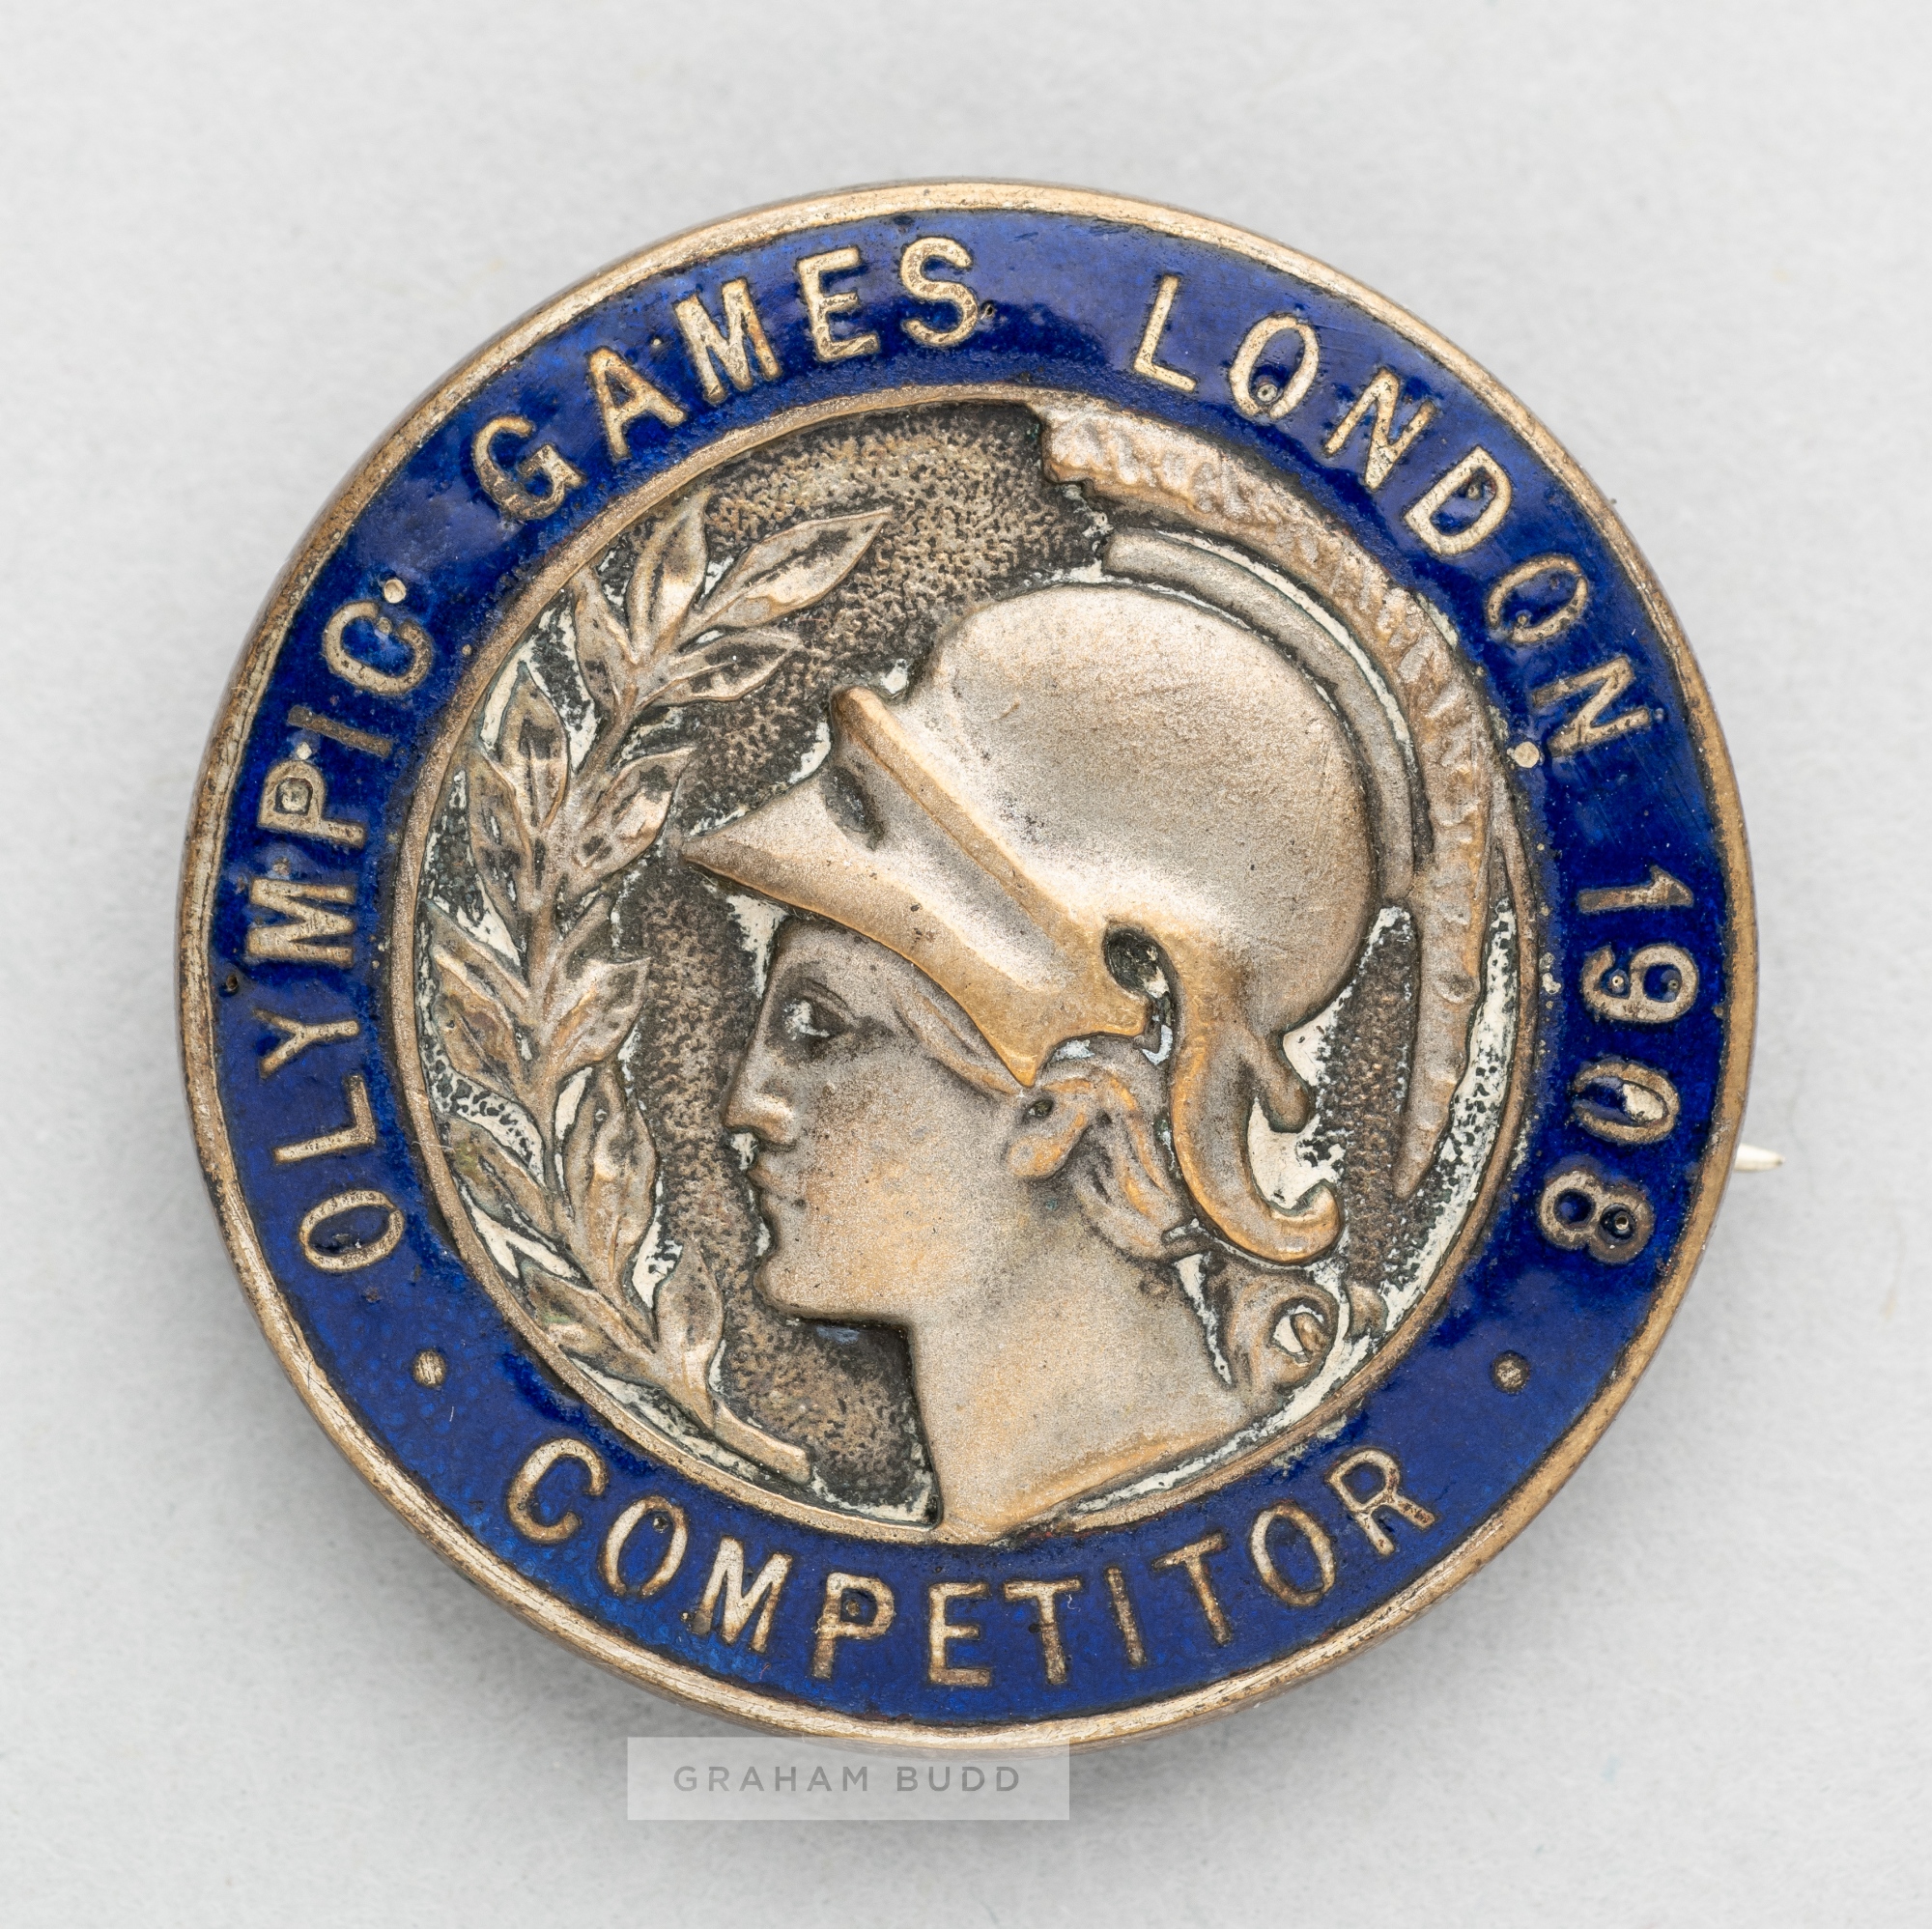 London 1908 Olympic Game Competitor's enamel lapel badge, by Vaughton of Birmingham, bearing the